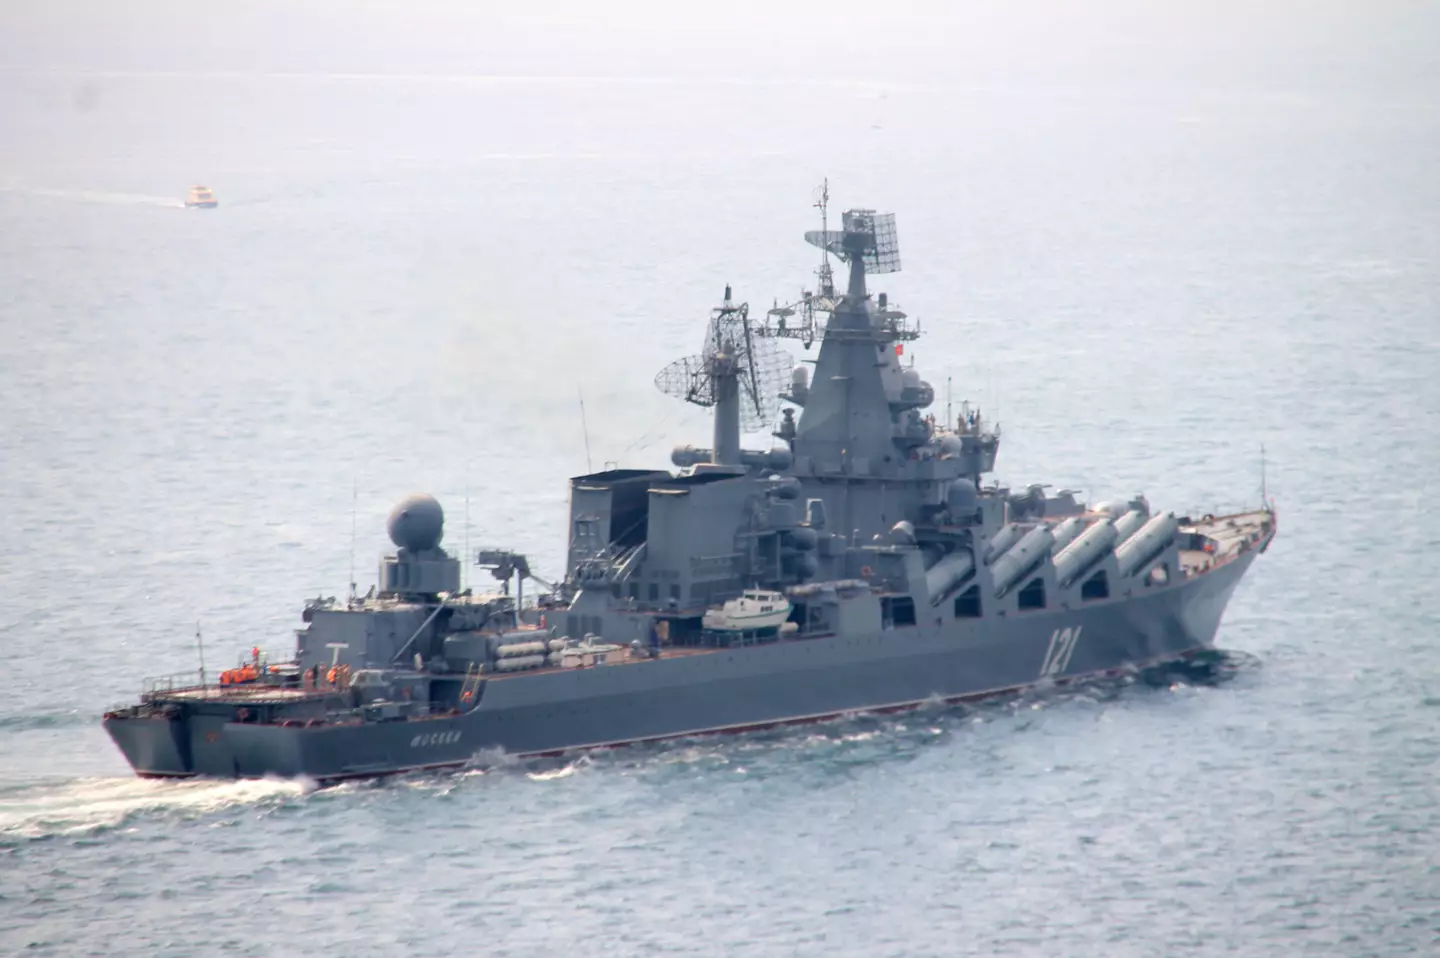 The Moskva, a missile cruiser and flagship of the country's Black Sea fleet, sank on 14 April.